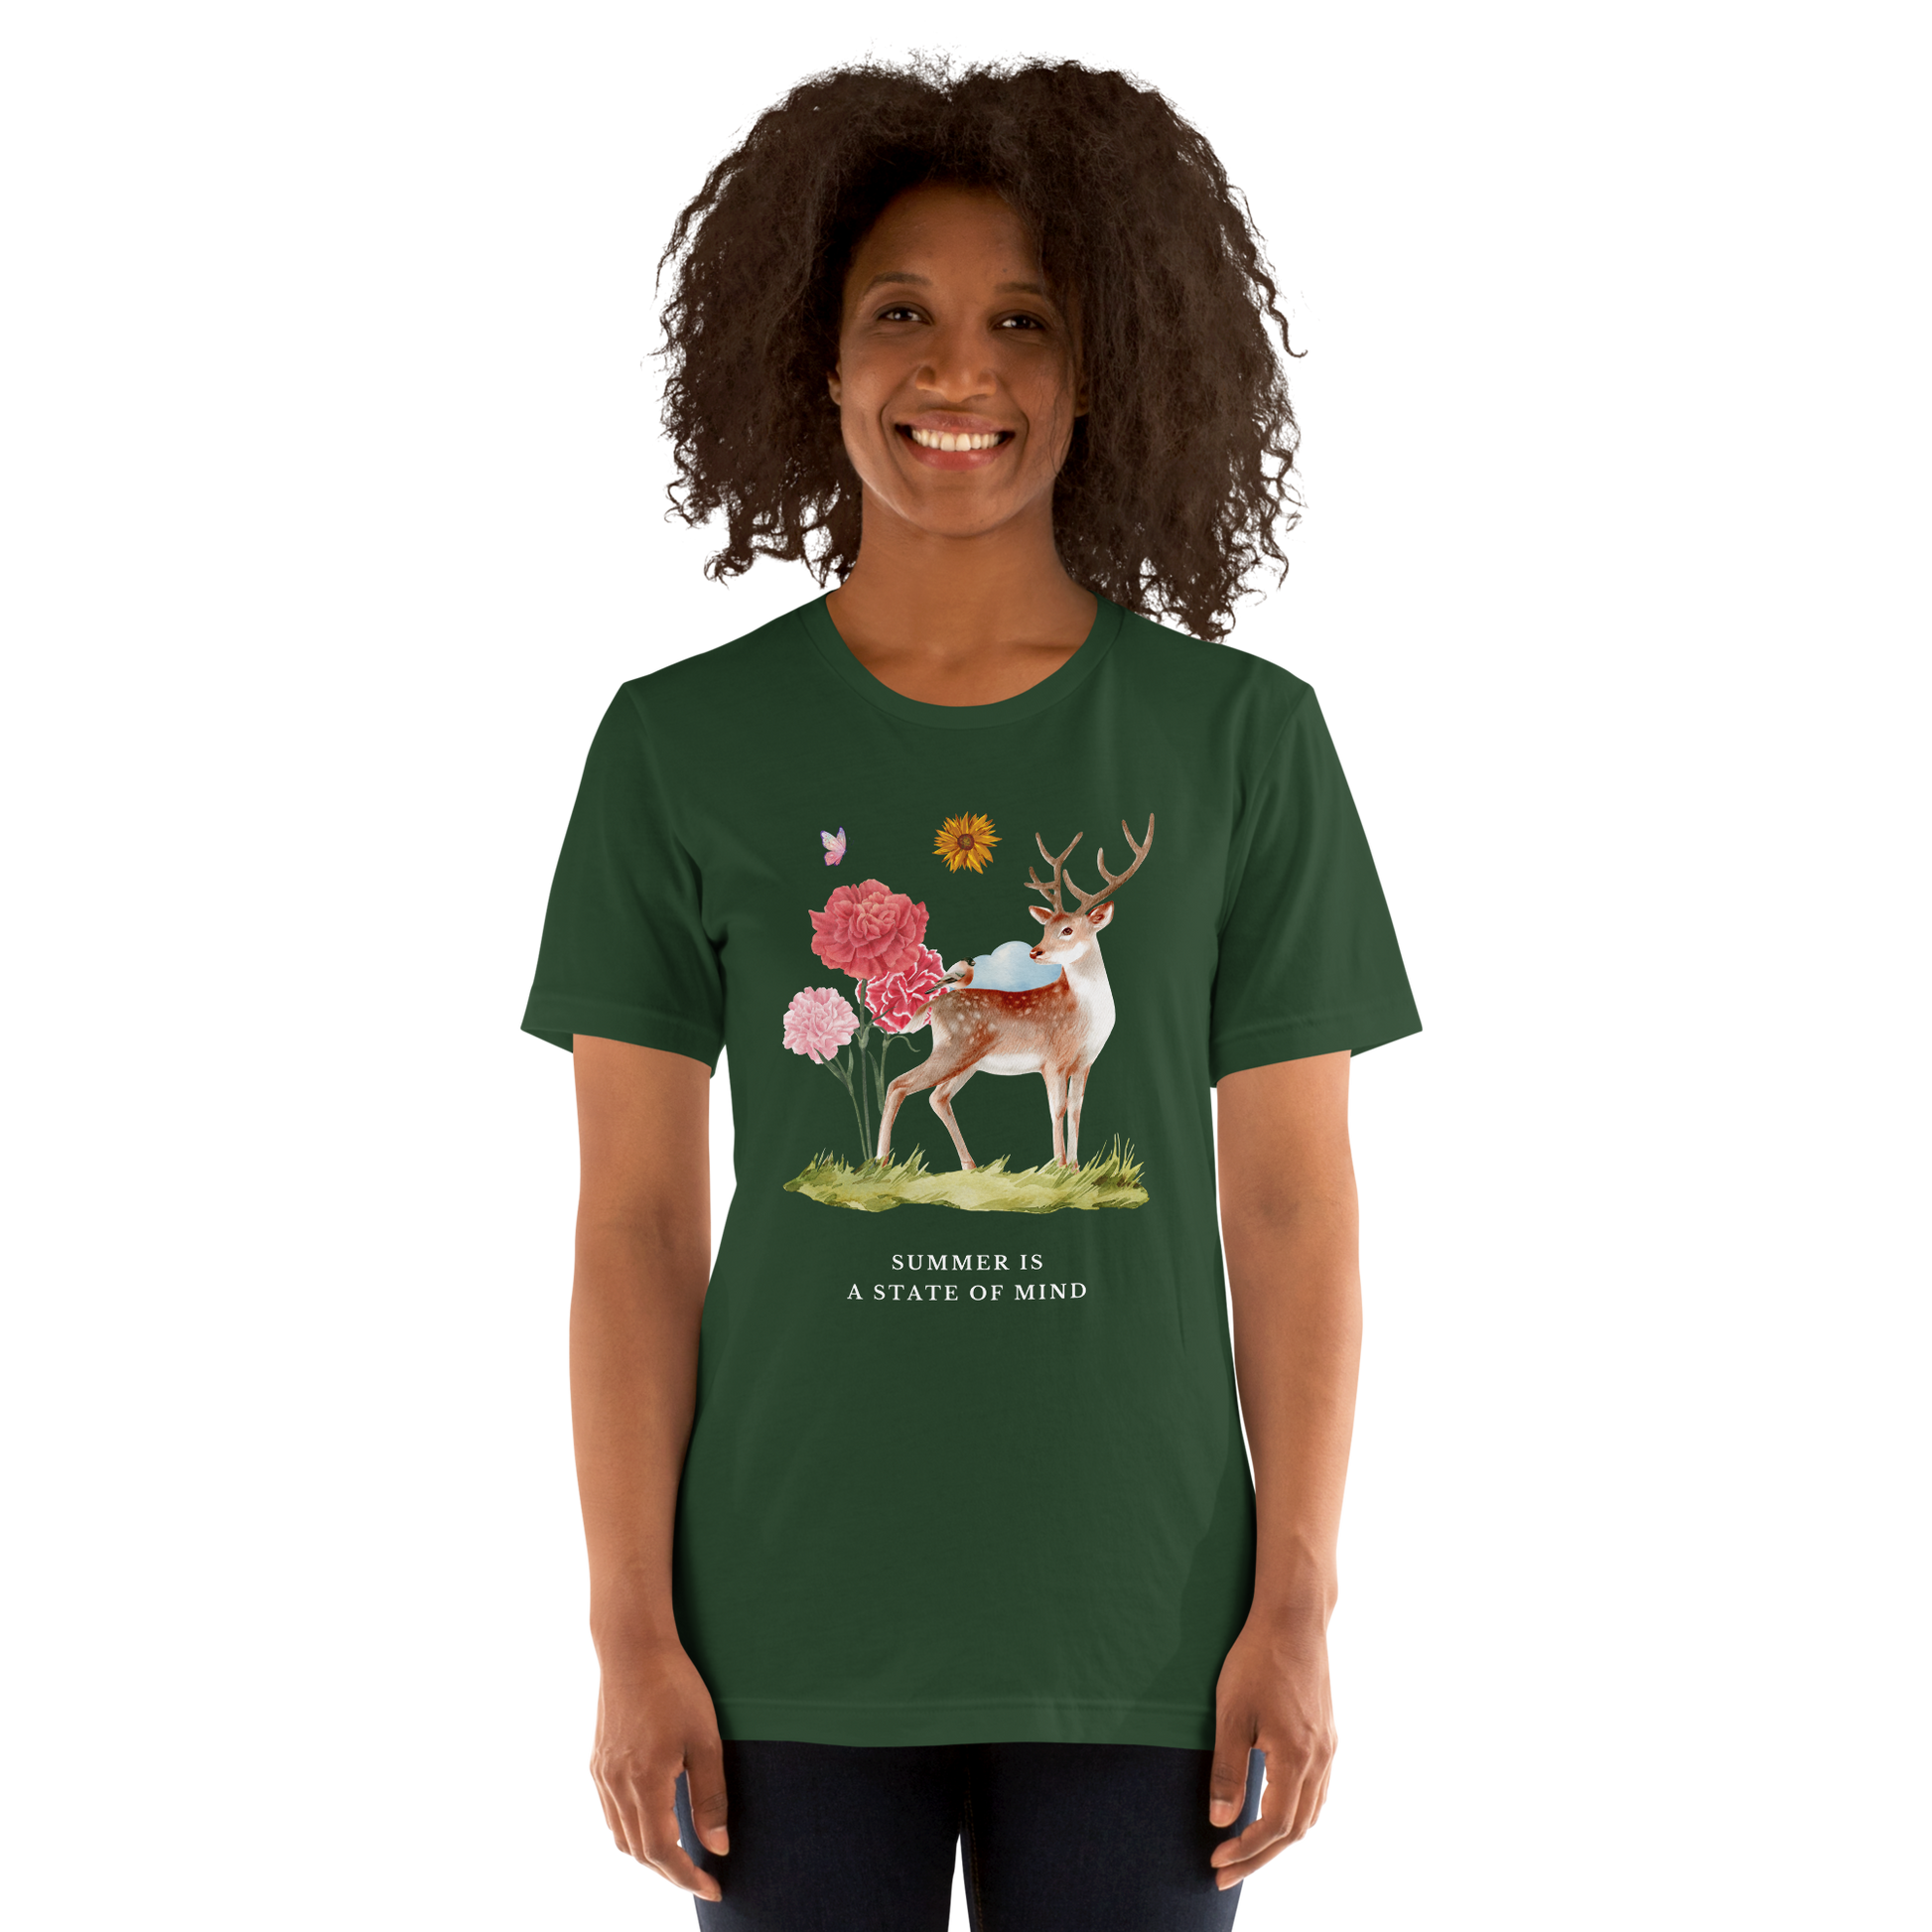 Woman wearing a Forest Green Premium Summer Is a State of Mind Tee featuring a Summer Is a State of Mind graphic on the chest - Cute Graphic Summer Tees - Boozy Fox